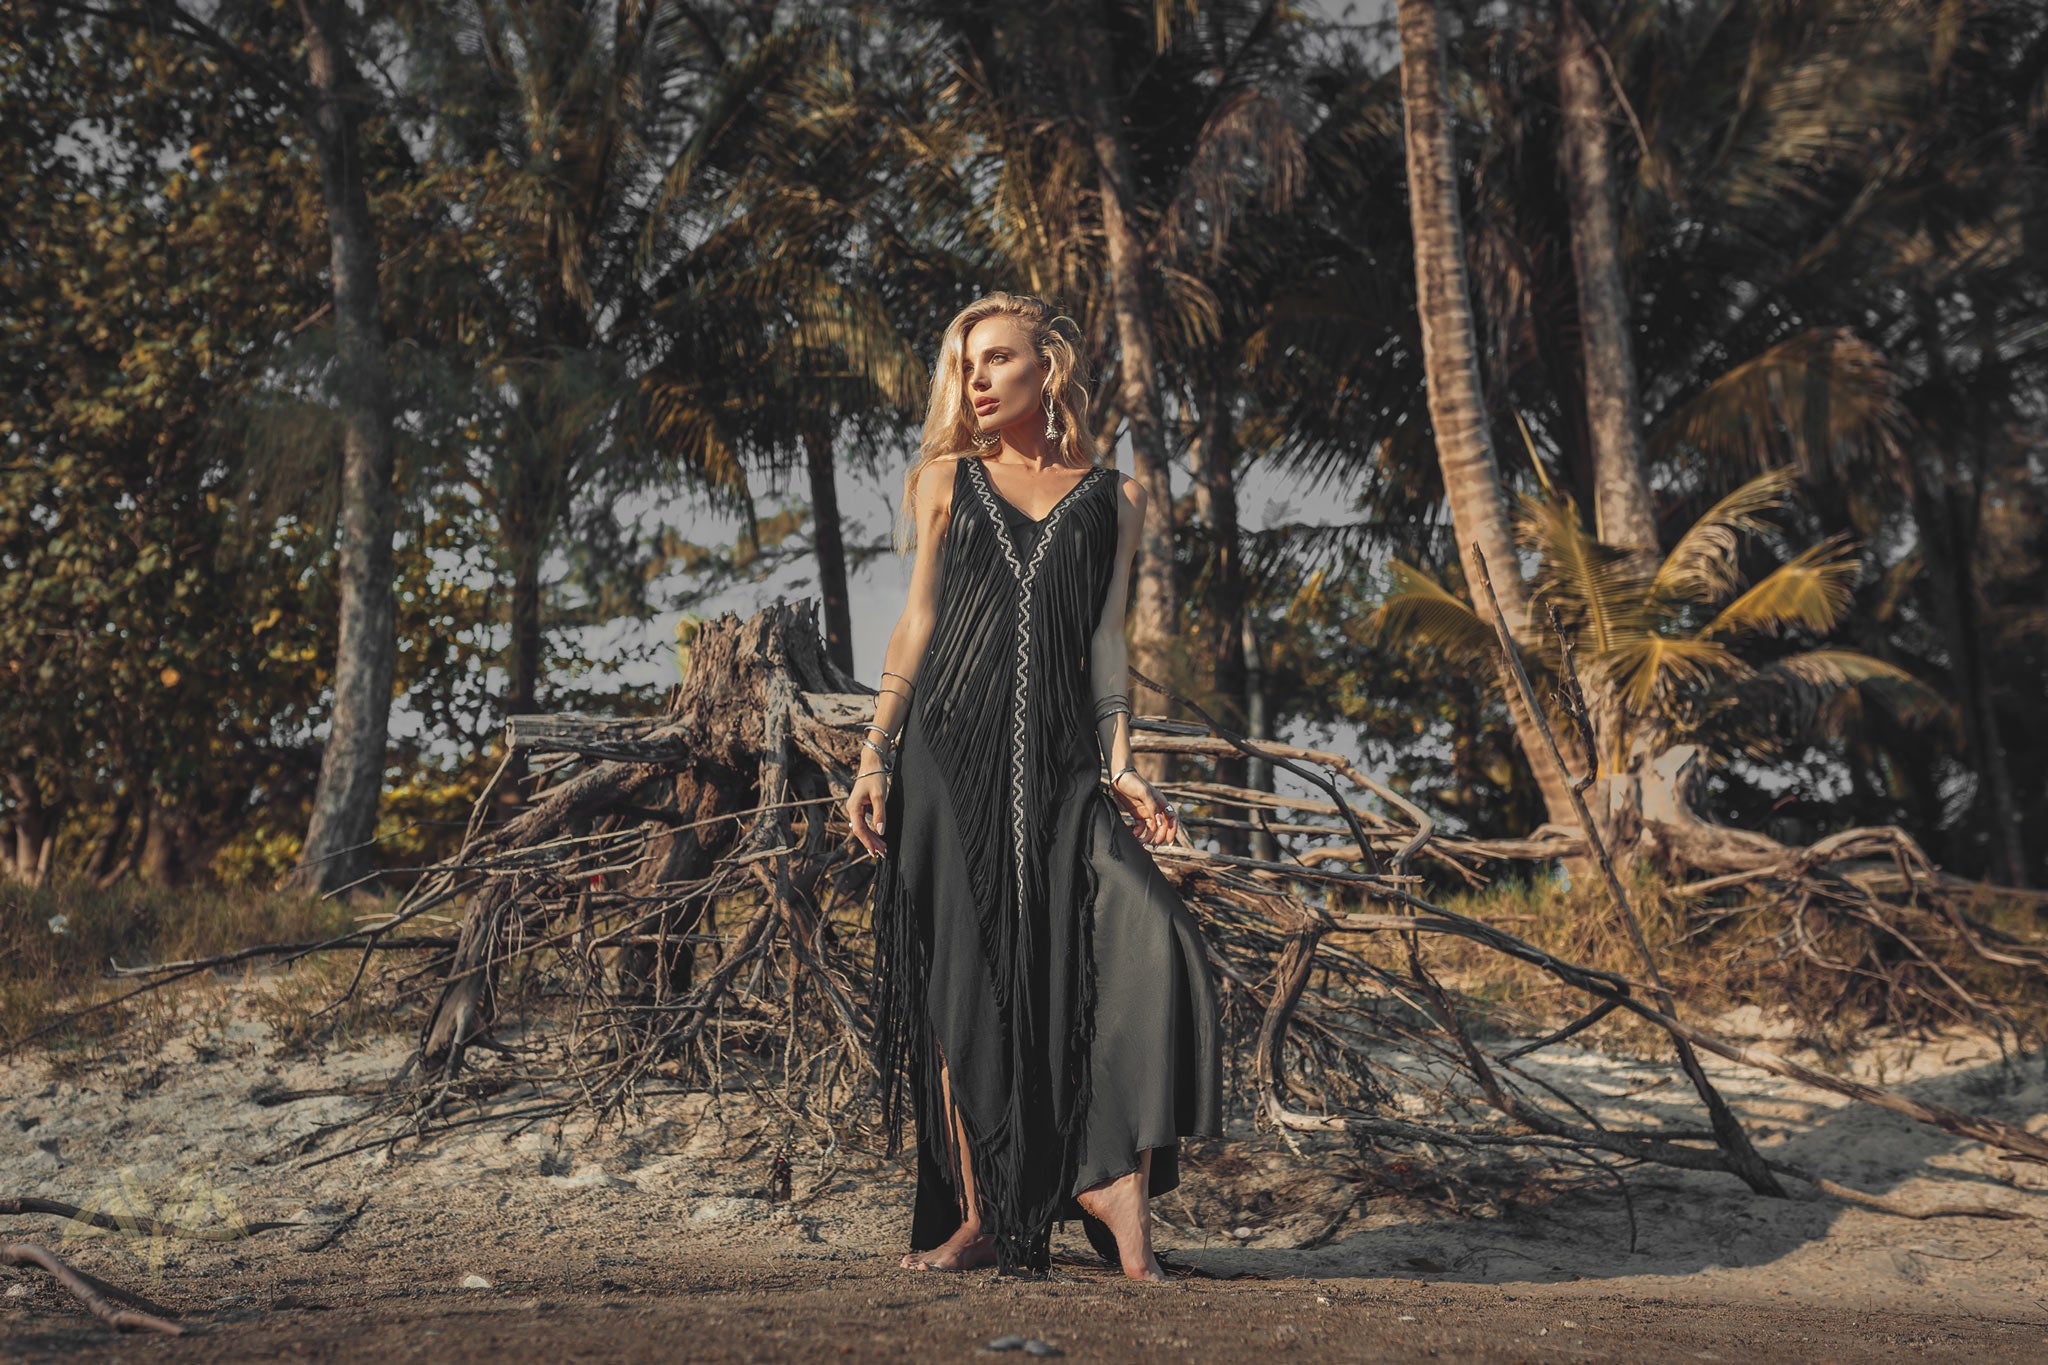 Boho Handwoven and Hand-Loomed Dress, Tribal Raw Cotton Cover-up - AYA Sacred Wear